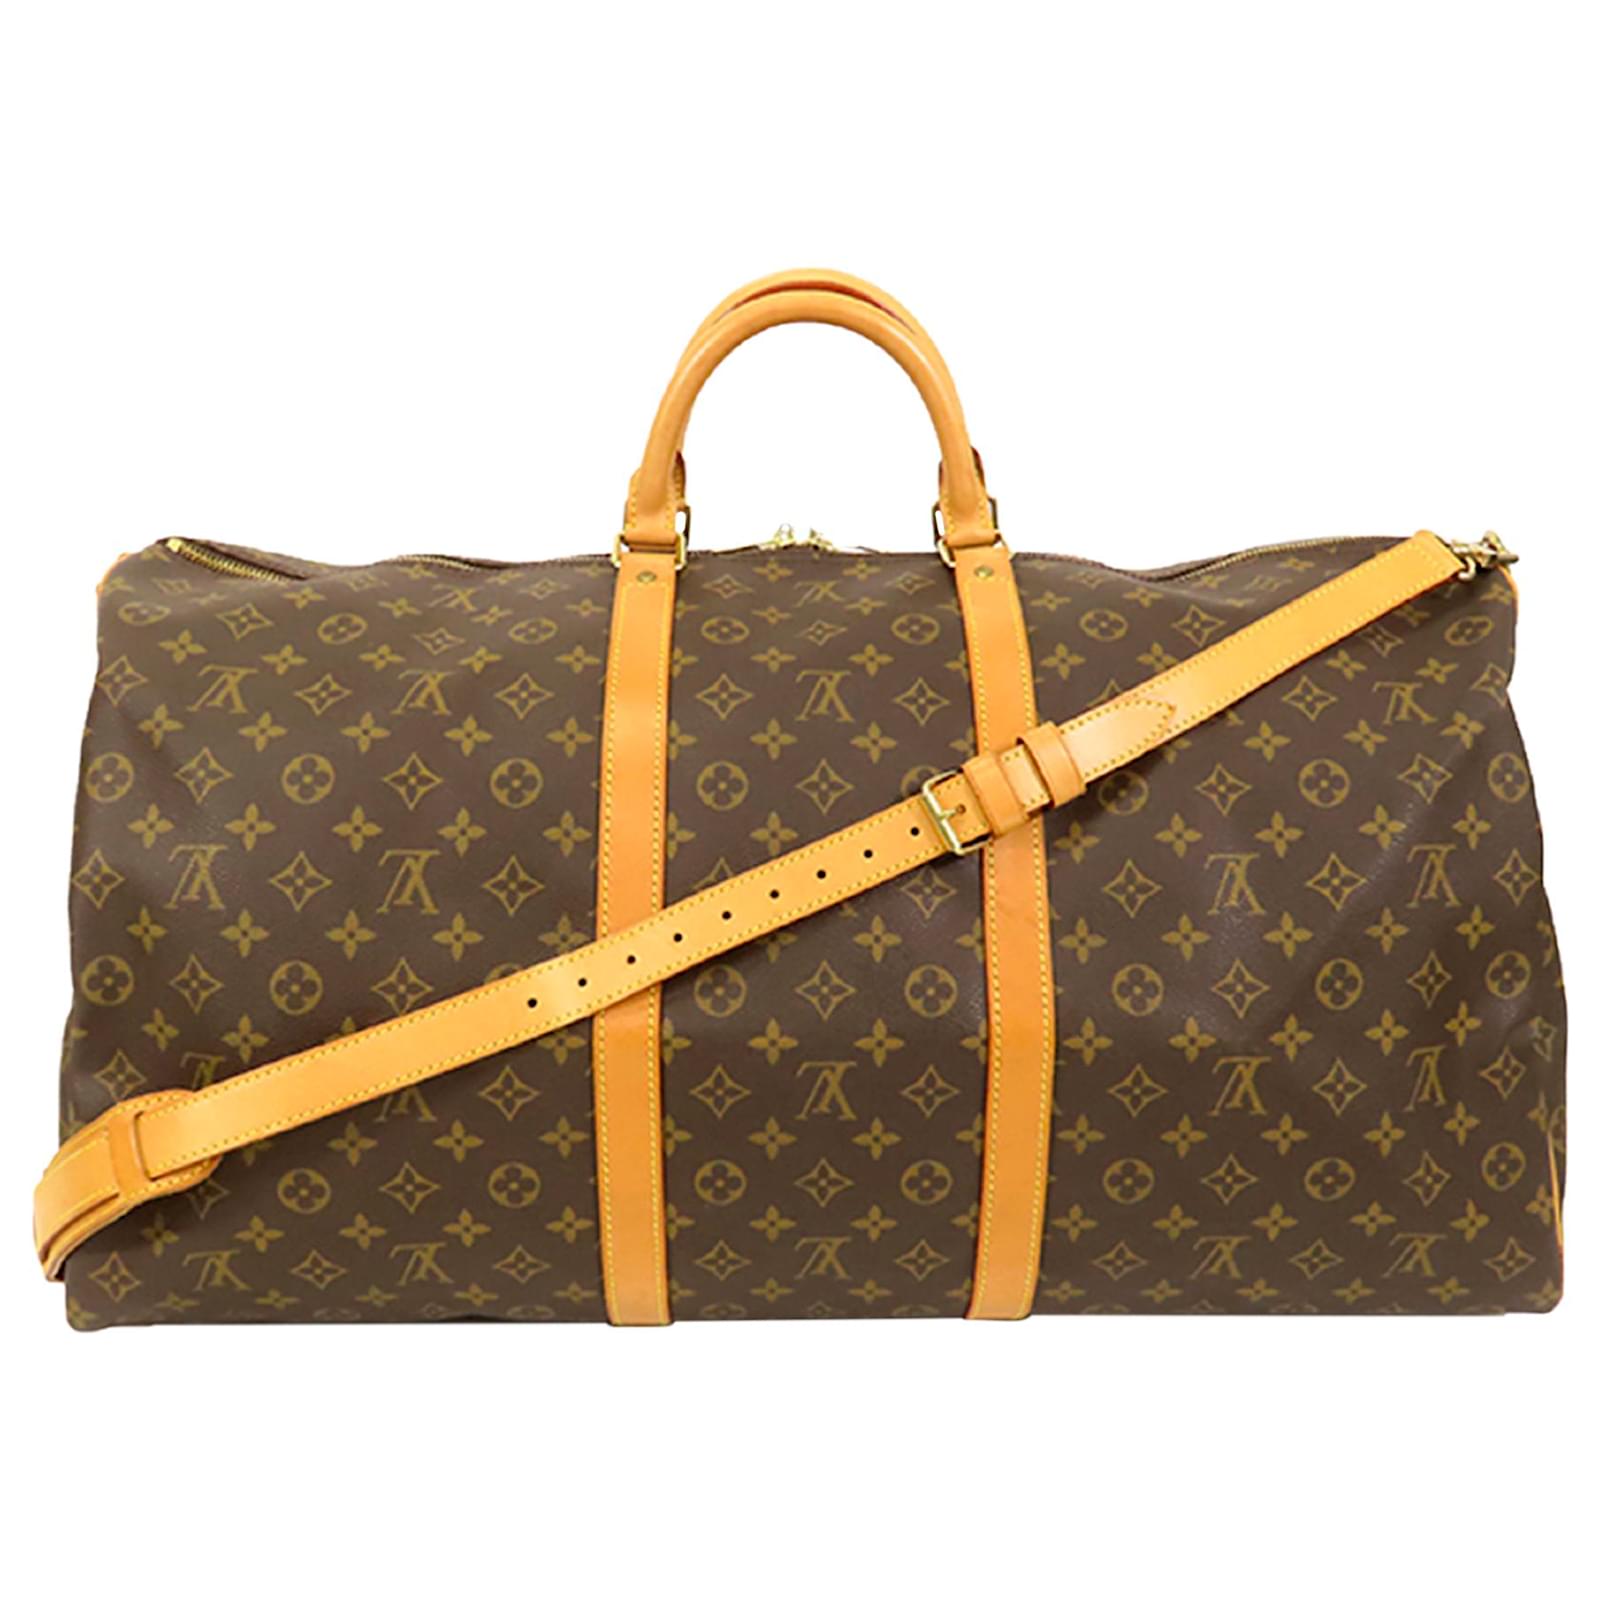 Louis Vuitton Keepall Bandouliere 60 - Good or Bag